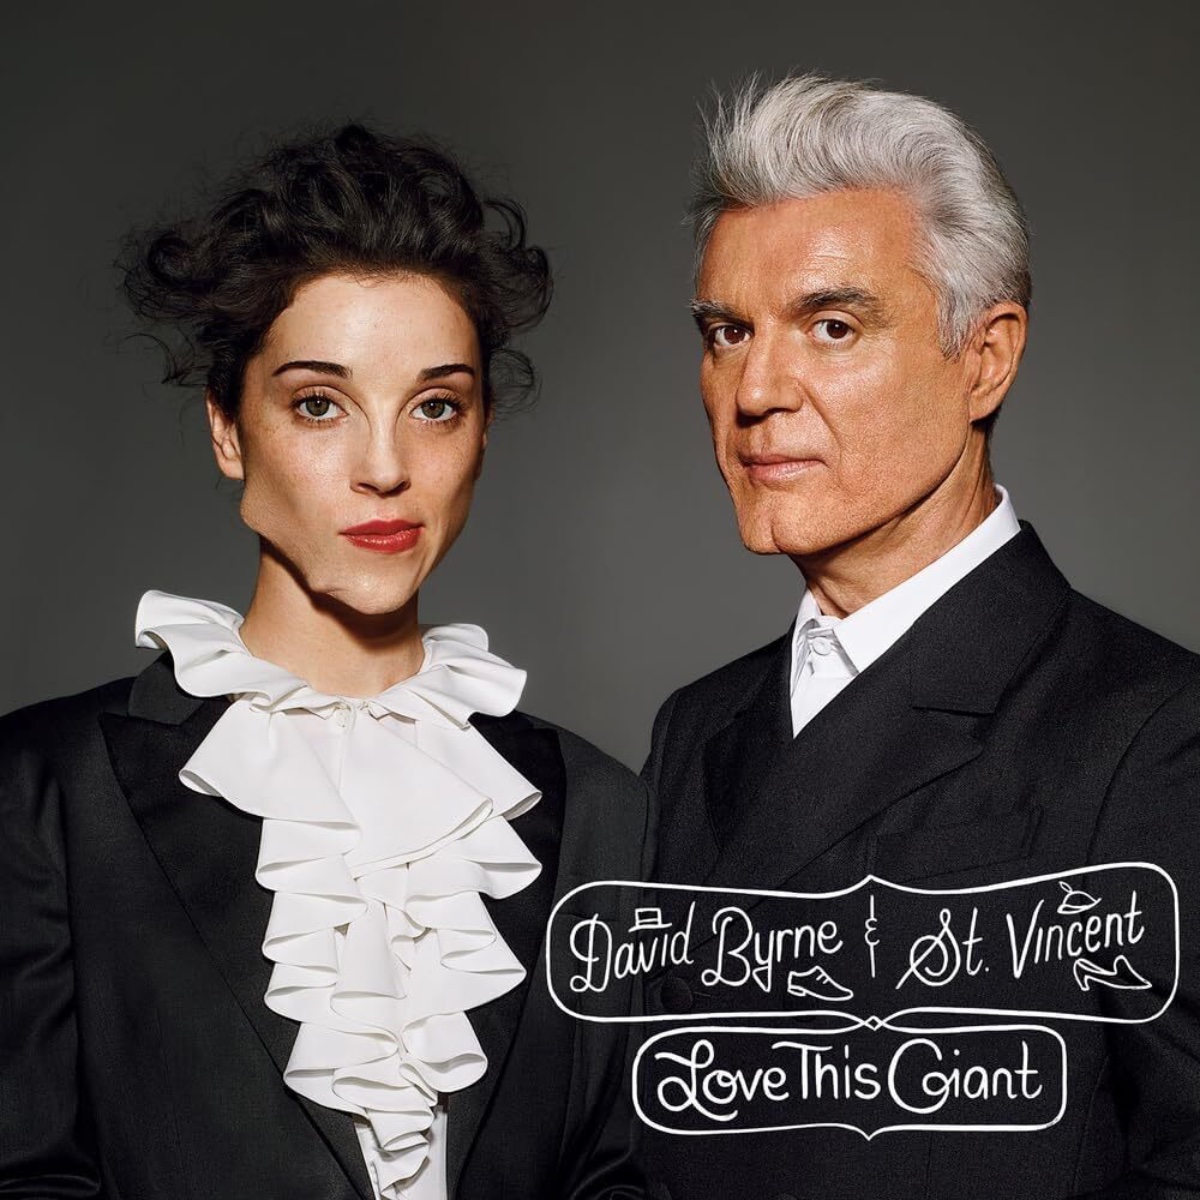 st_vincent_love_this_giant.jpg